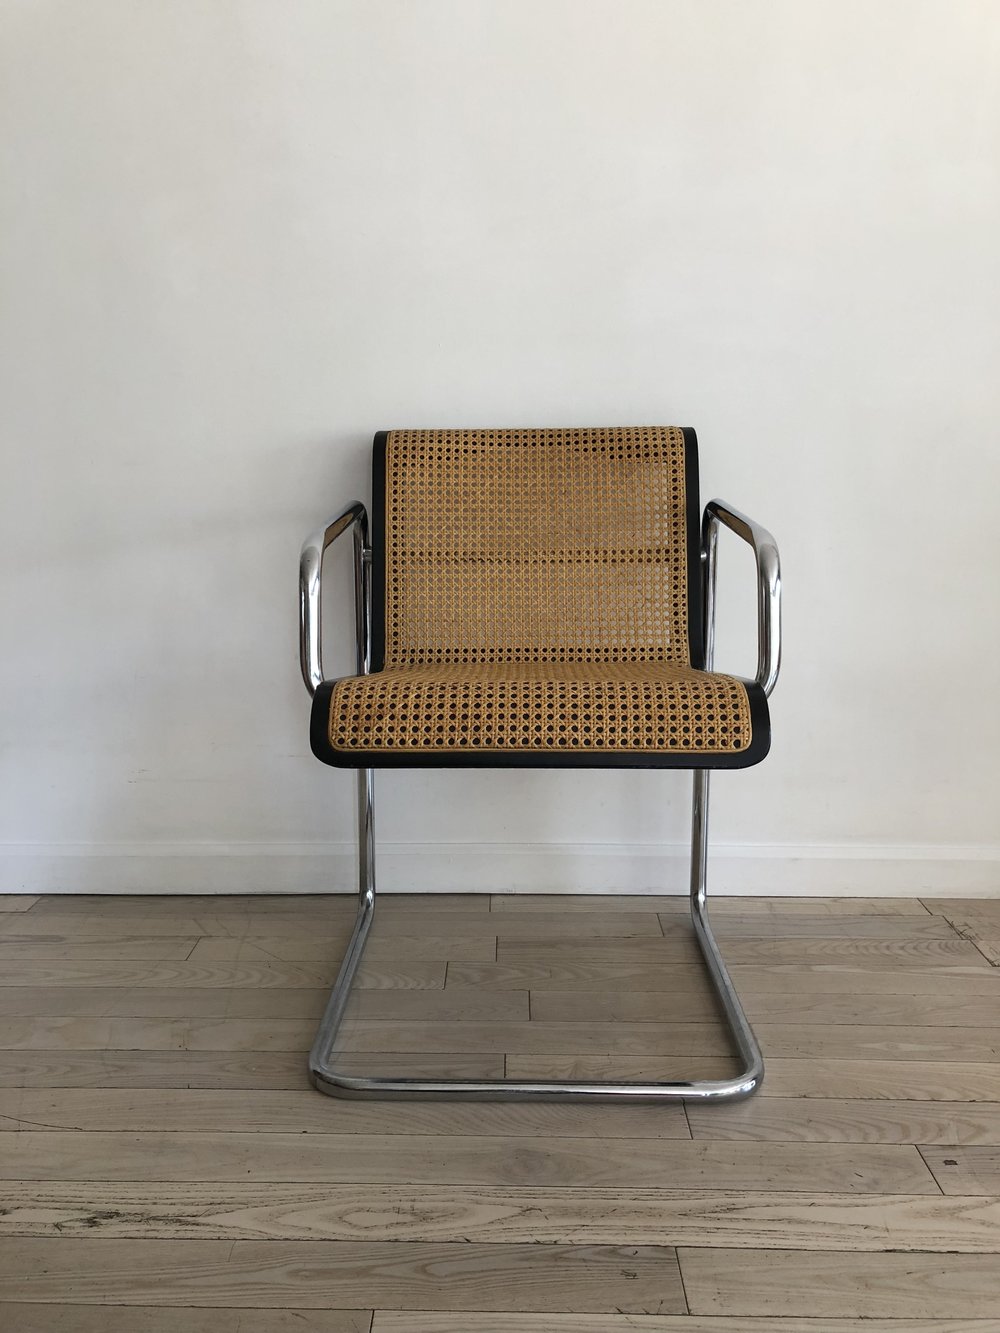 1970s Thonet Cane and Chrome Cantilever Arm Chair